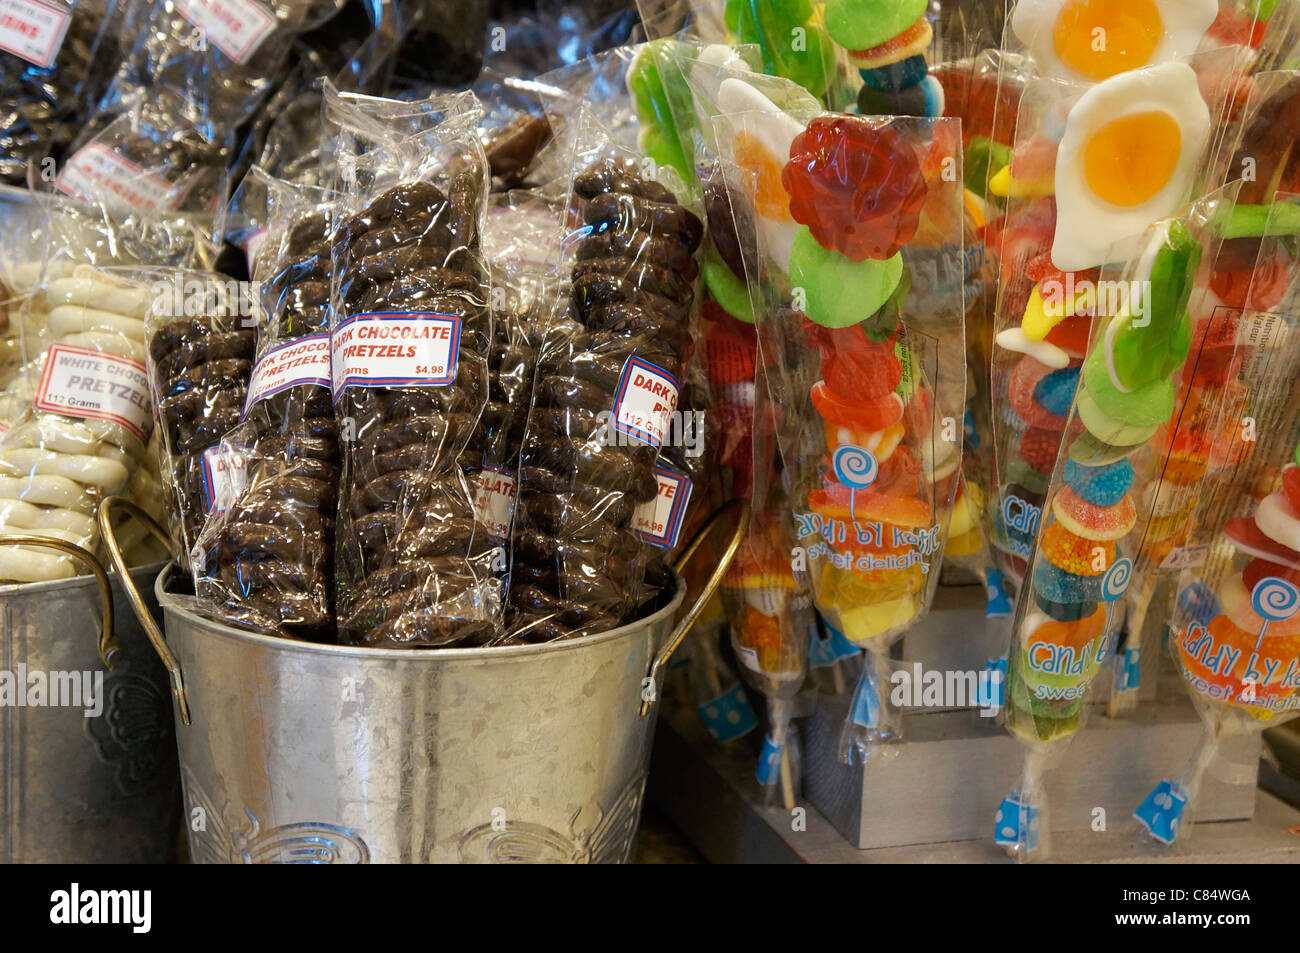 Candies, Sweets and Chocolate Stock Photo